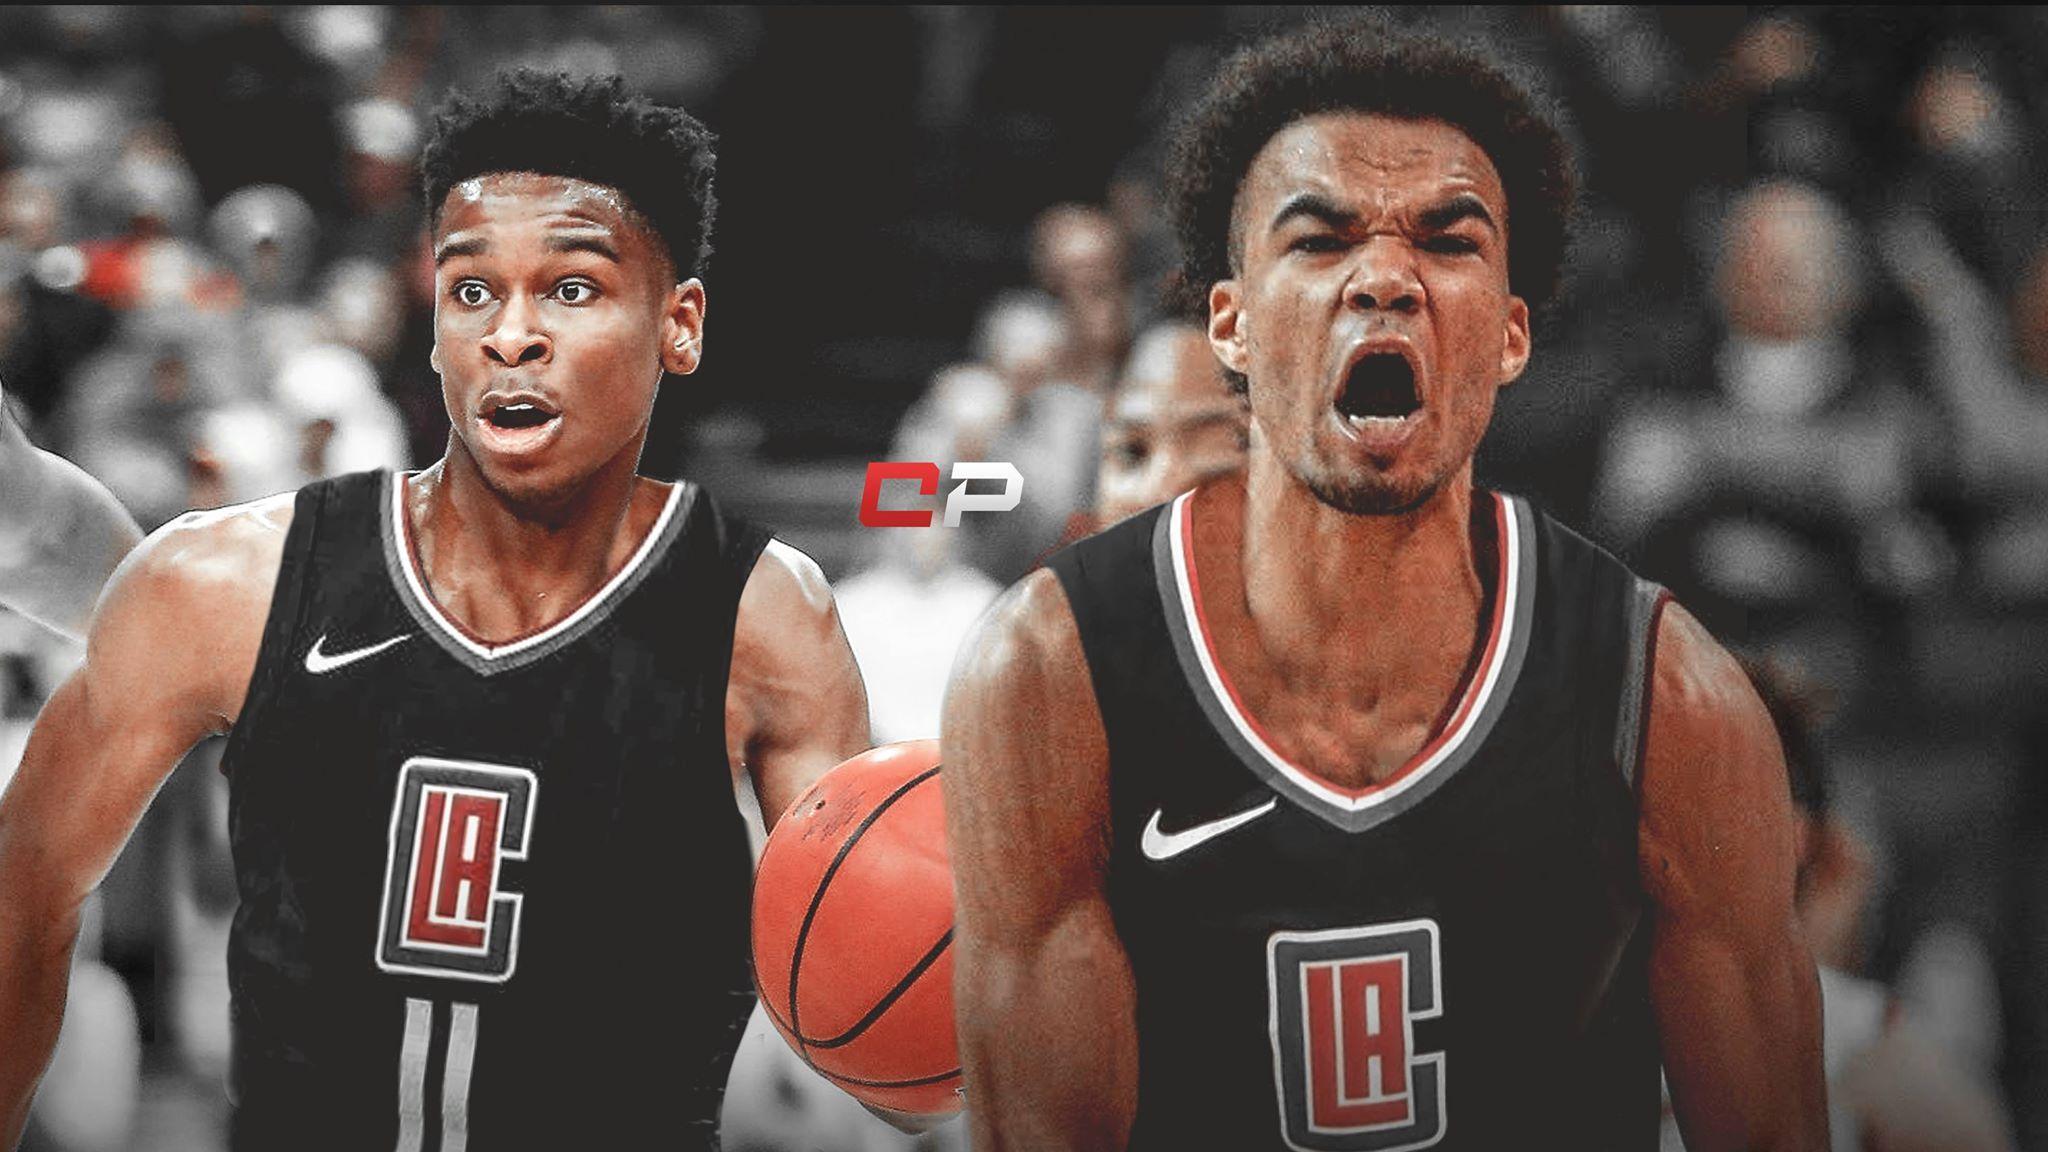 A Little Preview Of Shai Gilgeous Alexander And Jerome Robinson